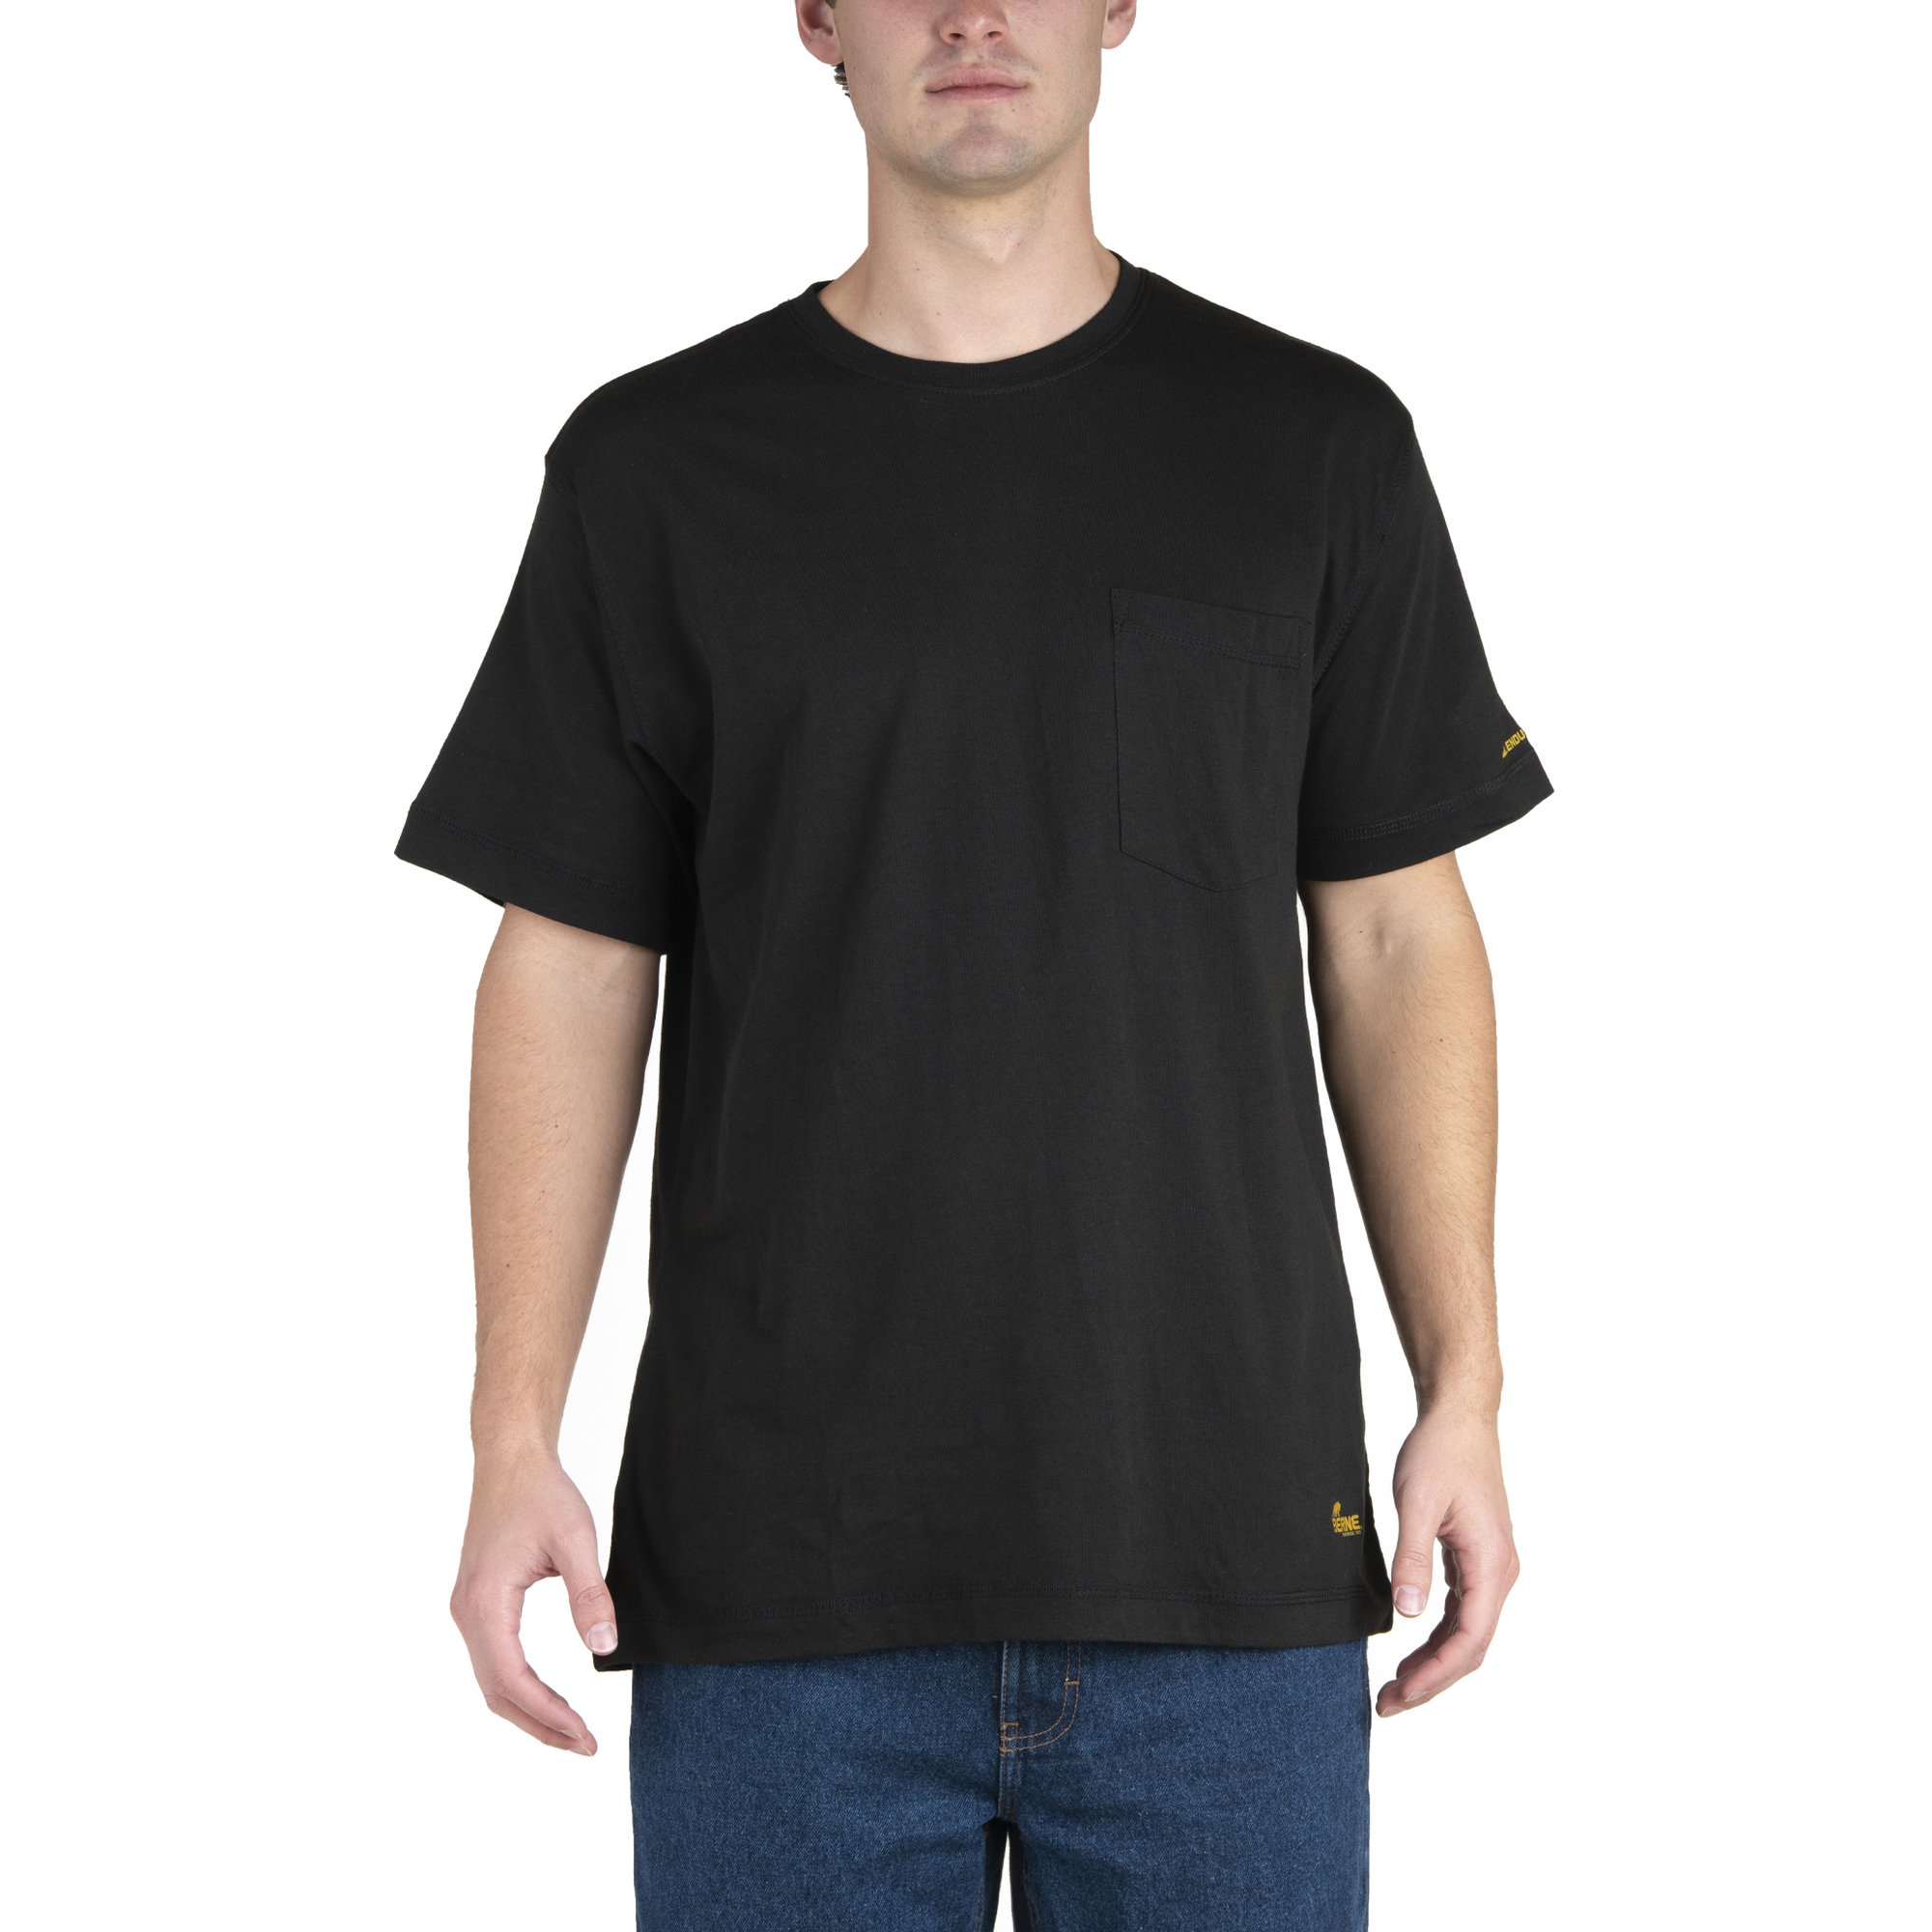 Berne Apparel, Lightweight Performance Tee-Style, Size 5XLT, Color Black, Material 60% Cotton 40% Polyester, Model BSM38